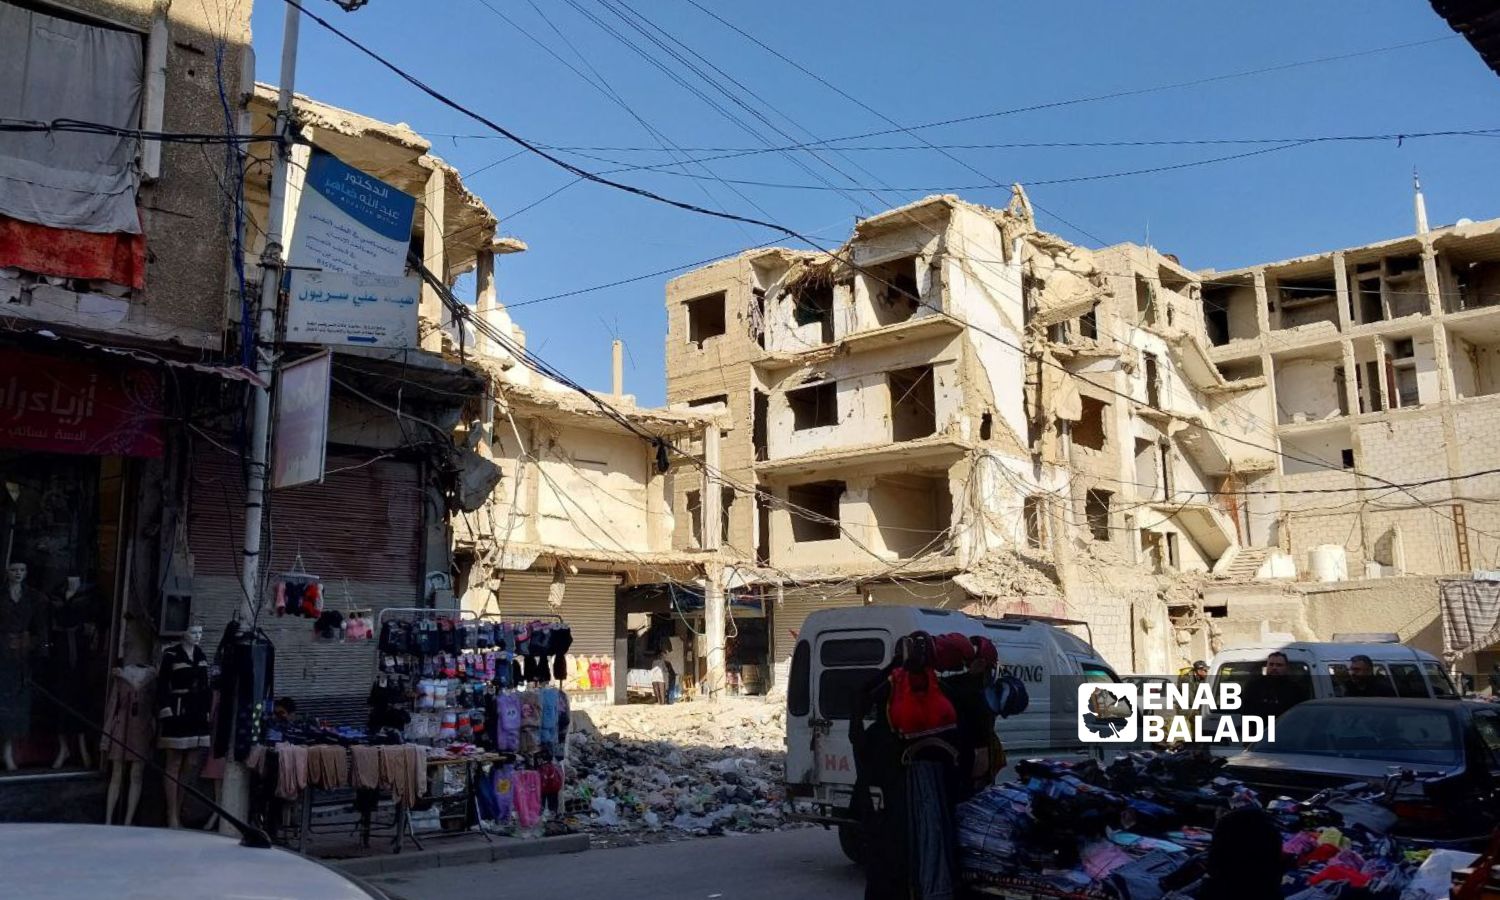 Shops and clothing stalls in the al-Jalaa Street in Douma city. The buildings were bombed by Syrian regime warplanes during opposition factions